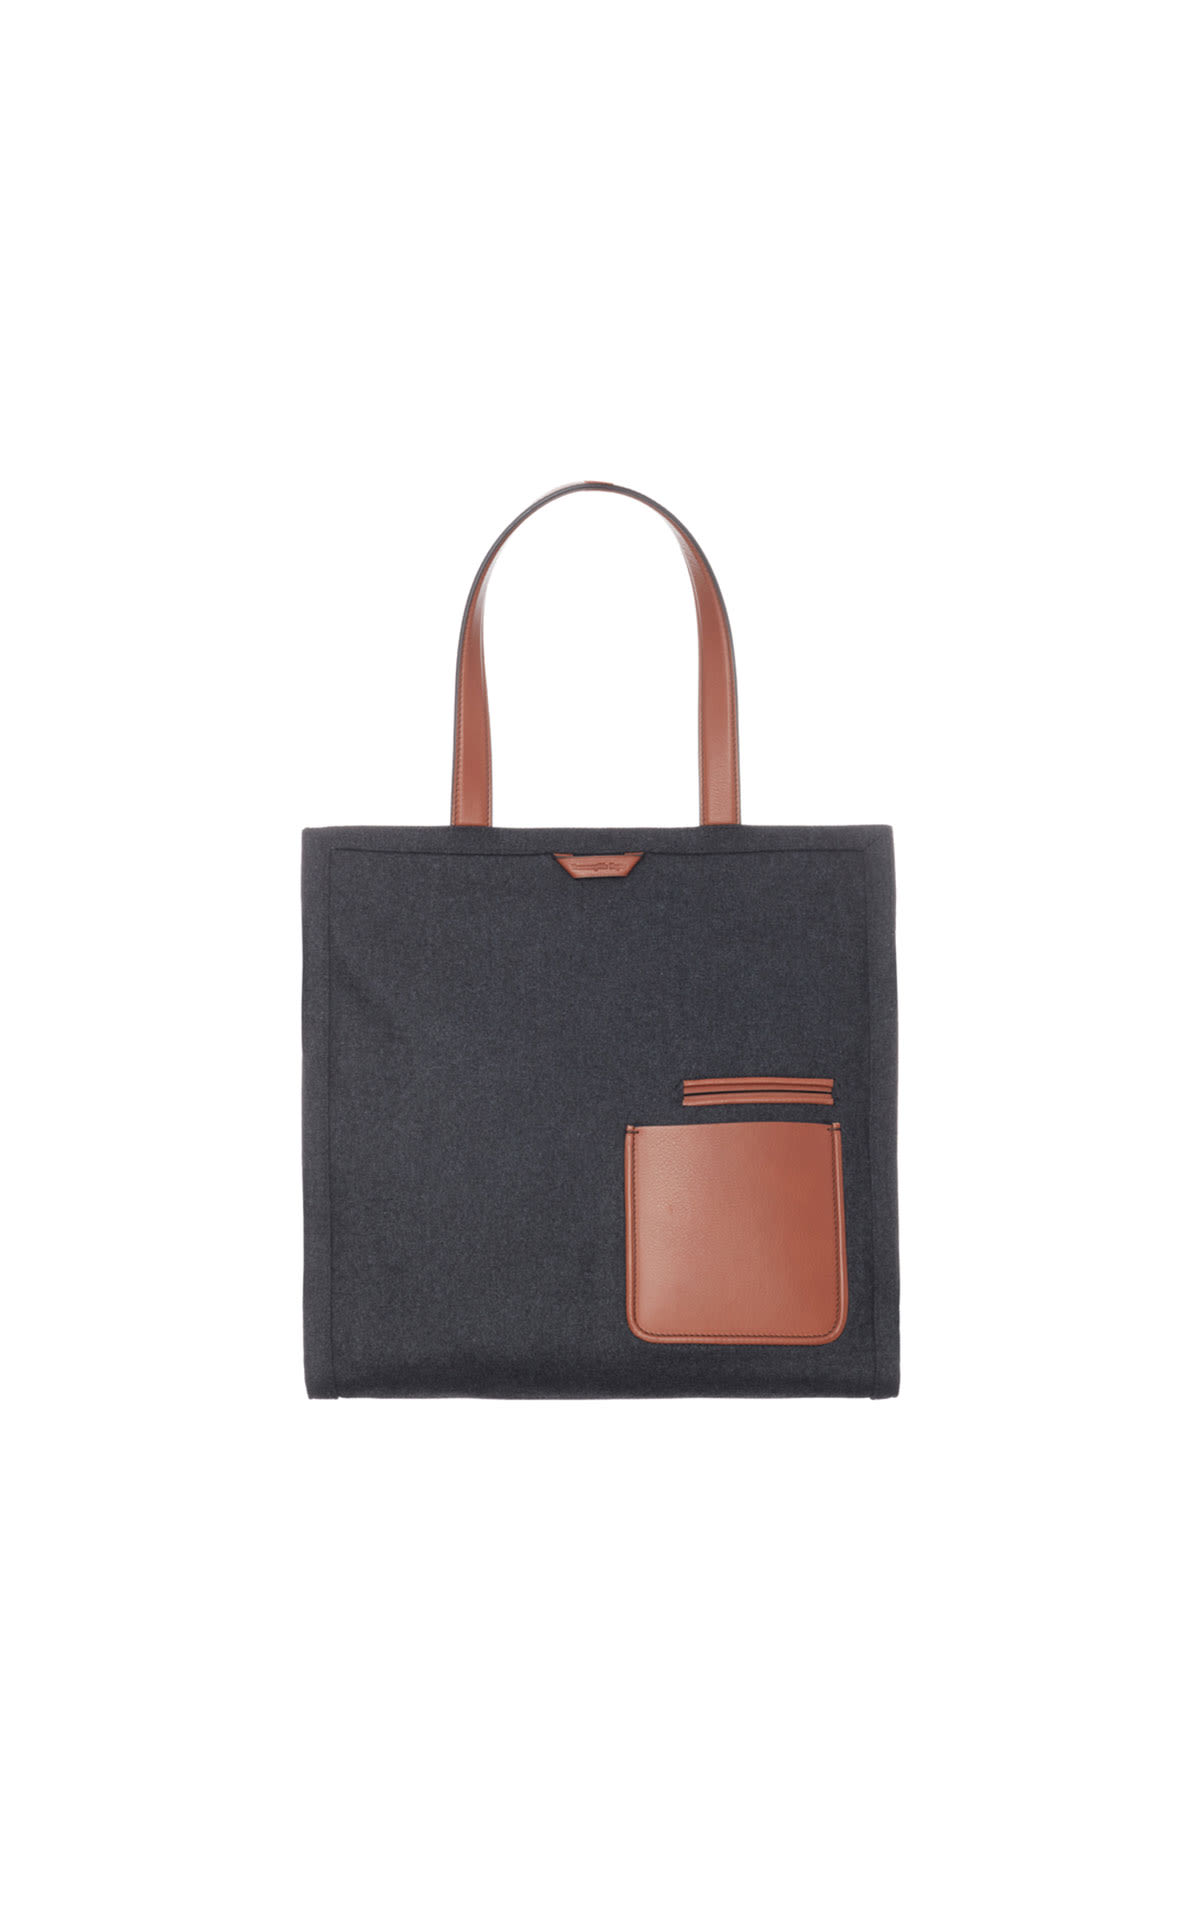 Zegna Tote bag from Bicester Village